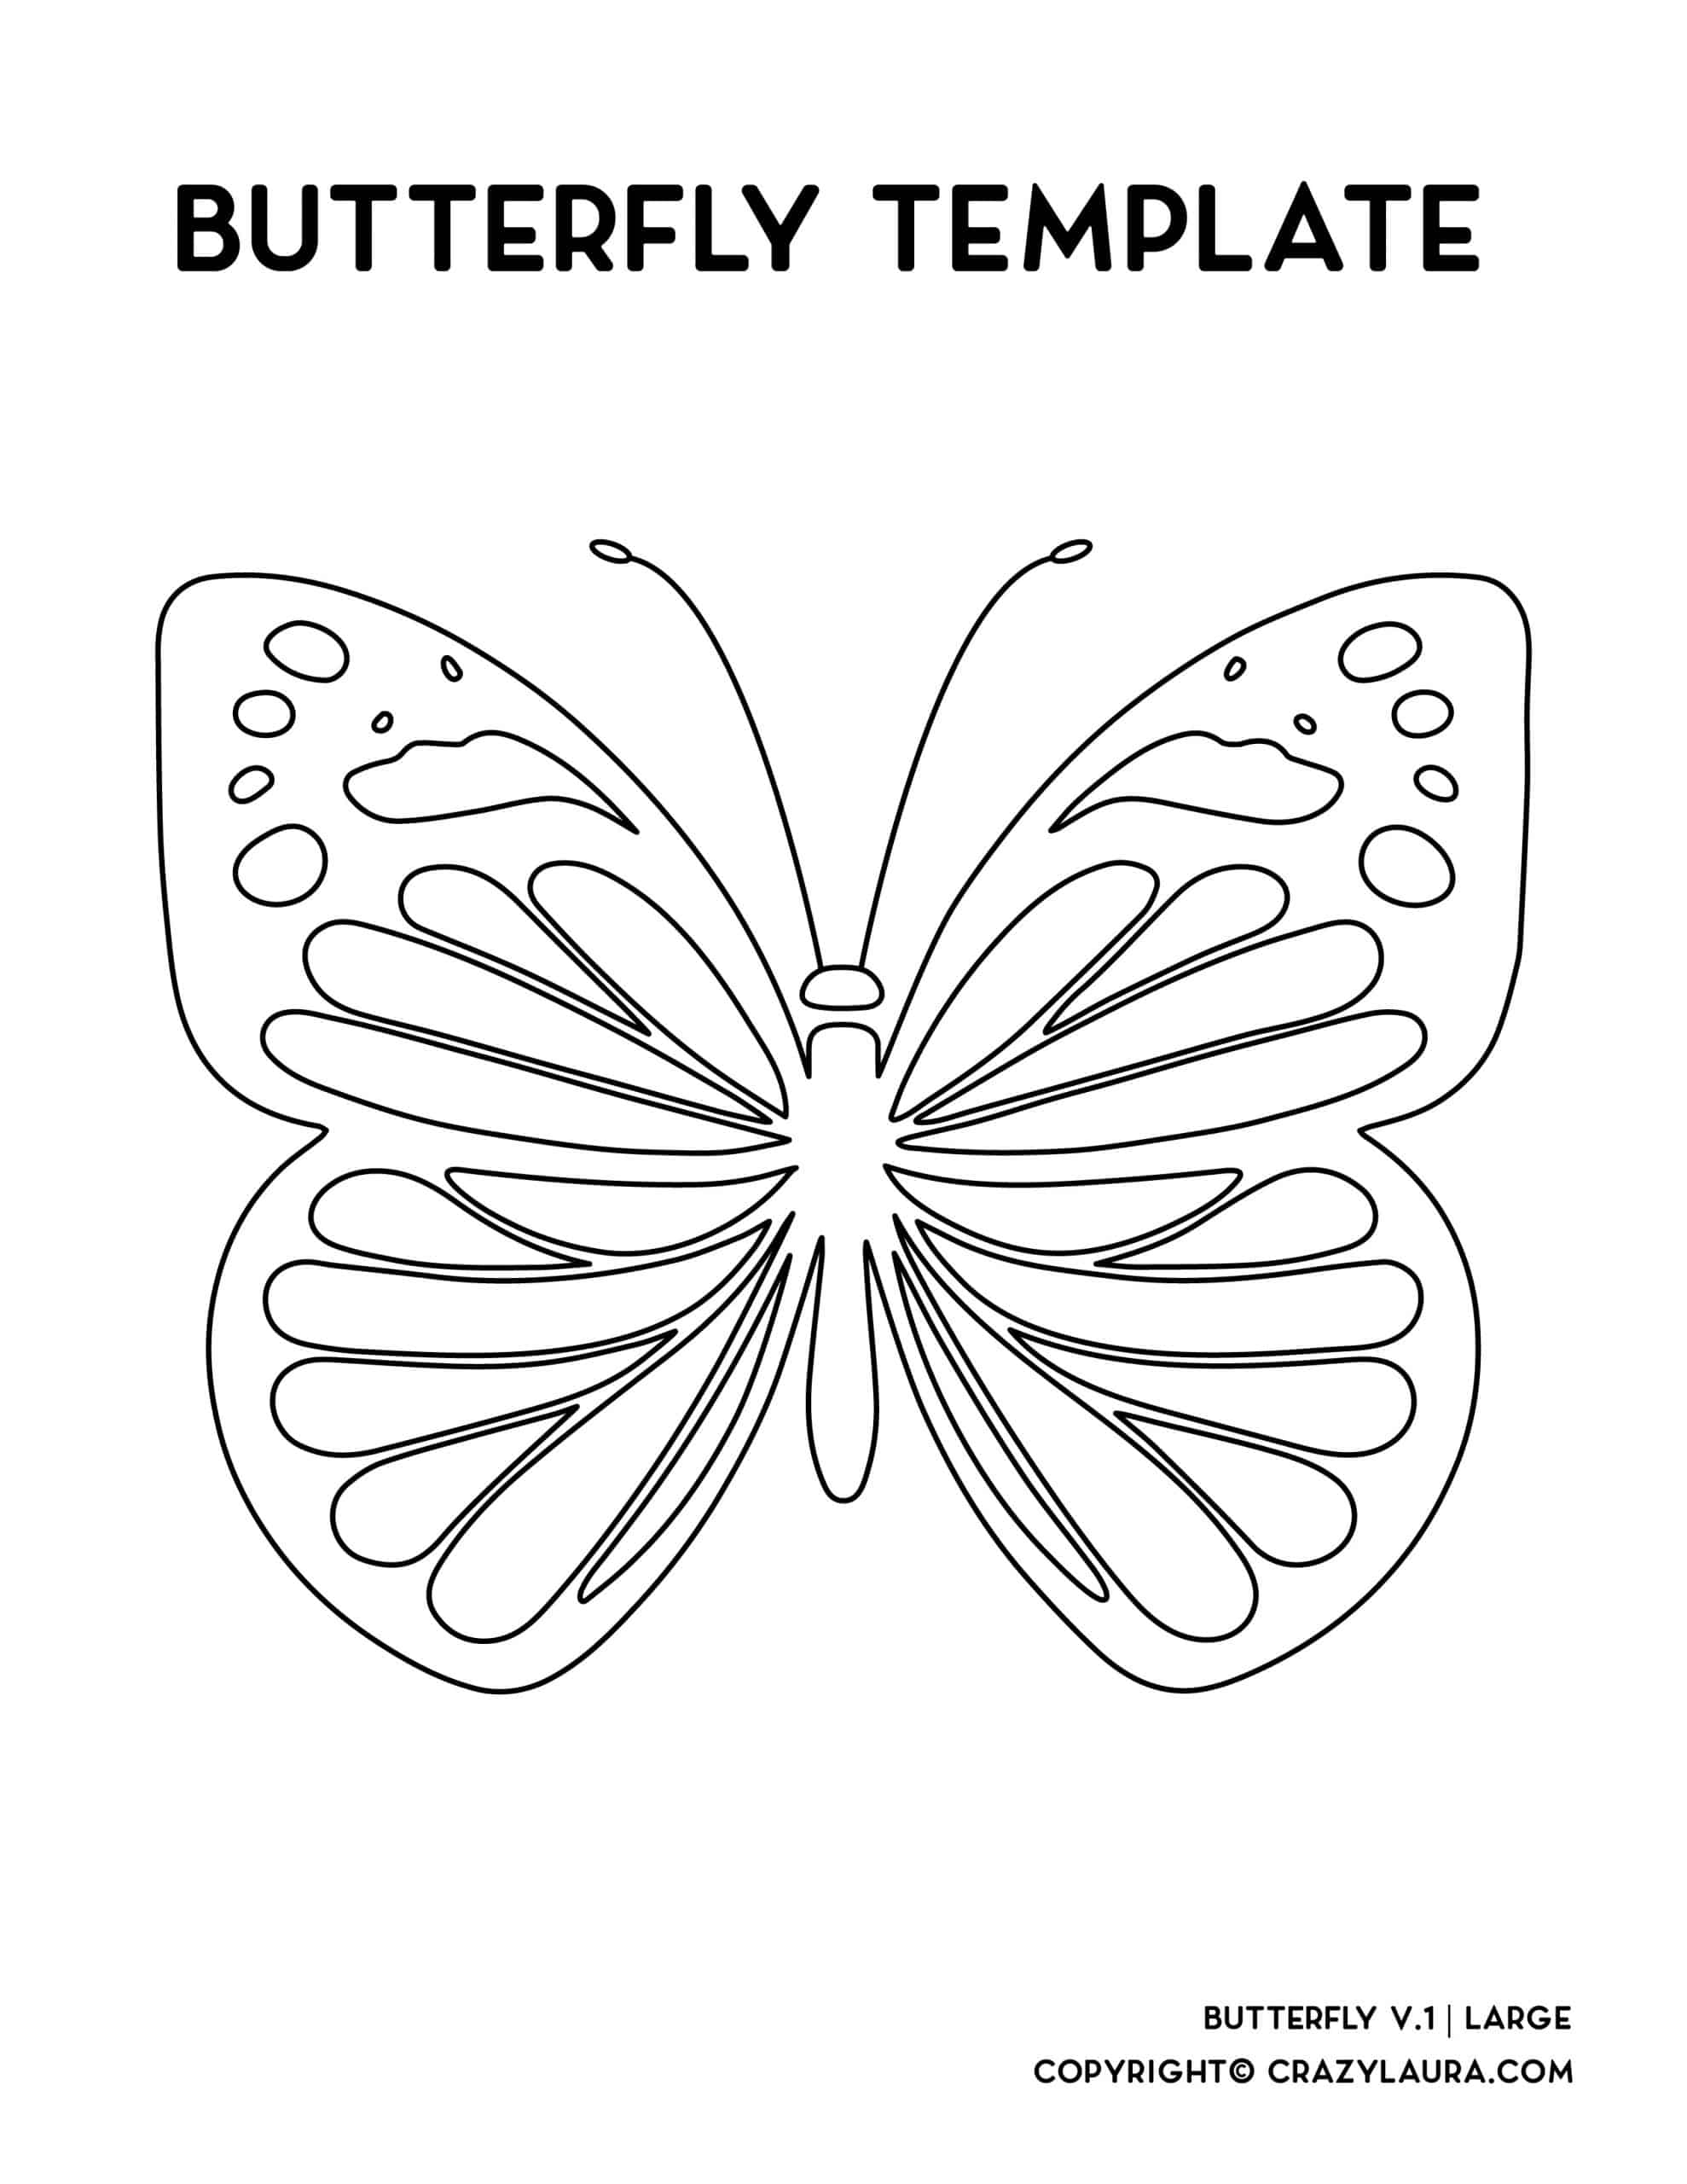 Free Butterfly Template Coloring Pages To Print Crazy Laura - Fillable ...